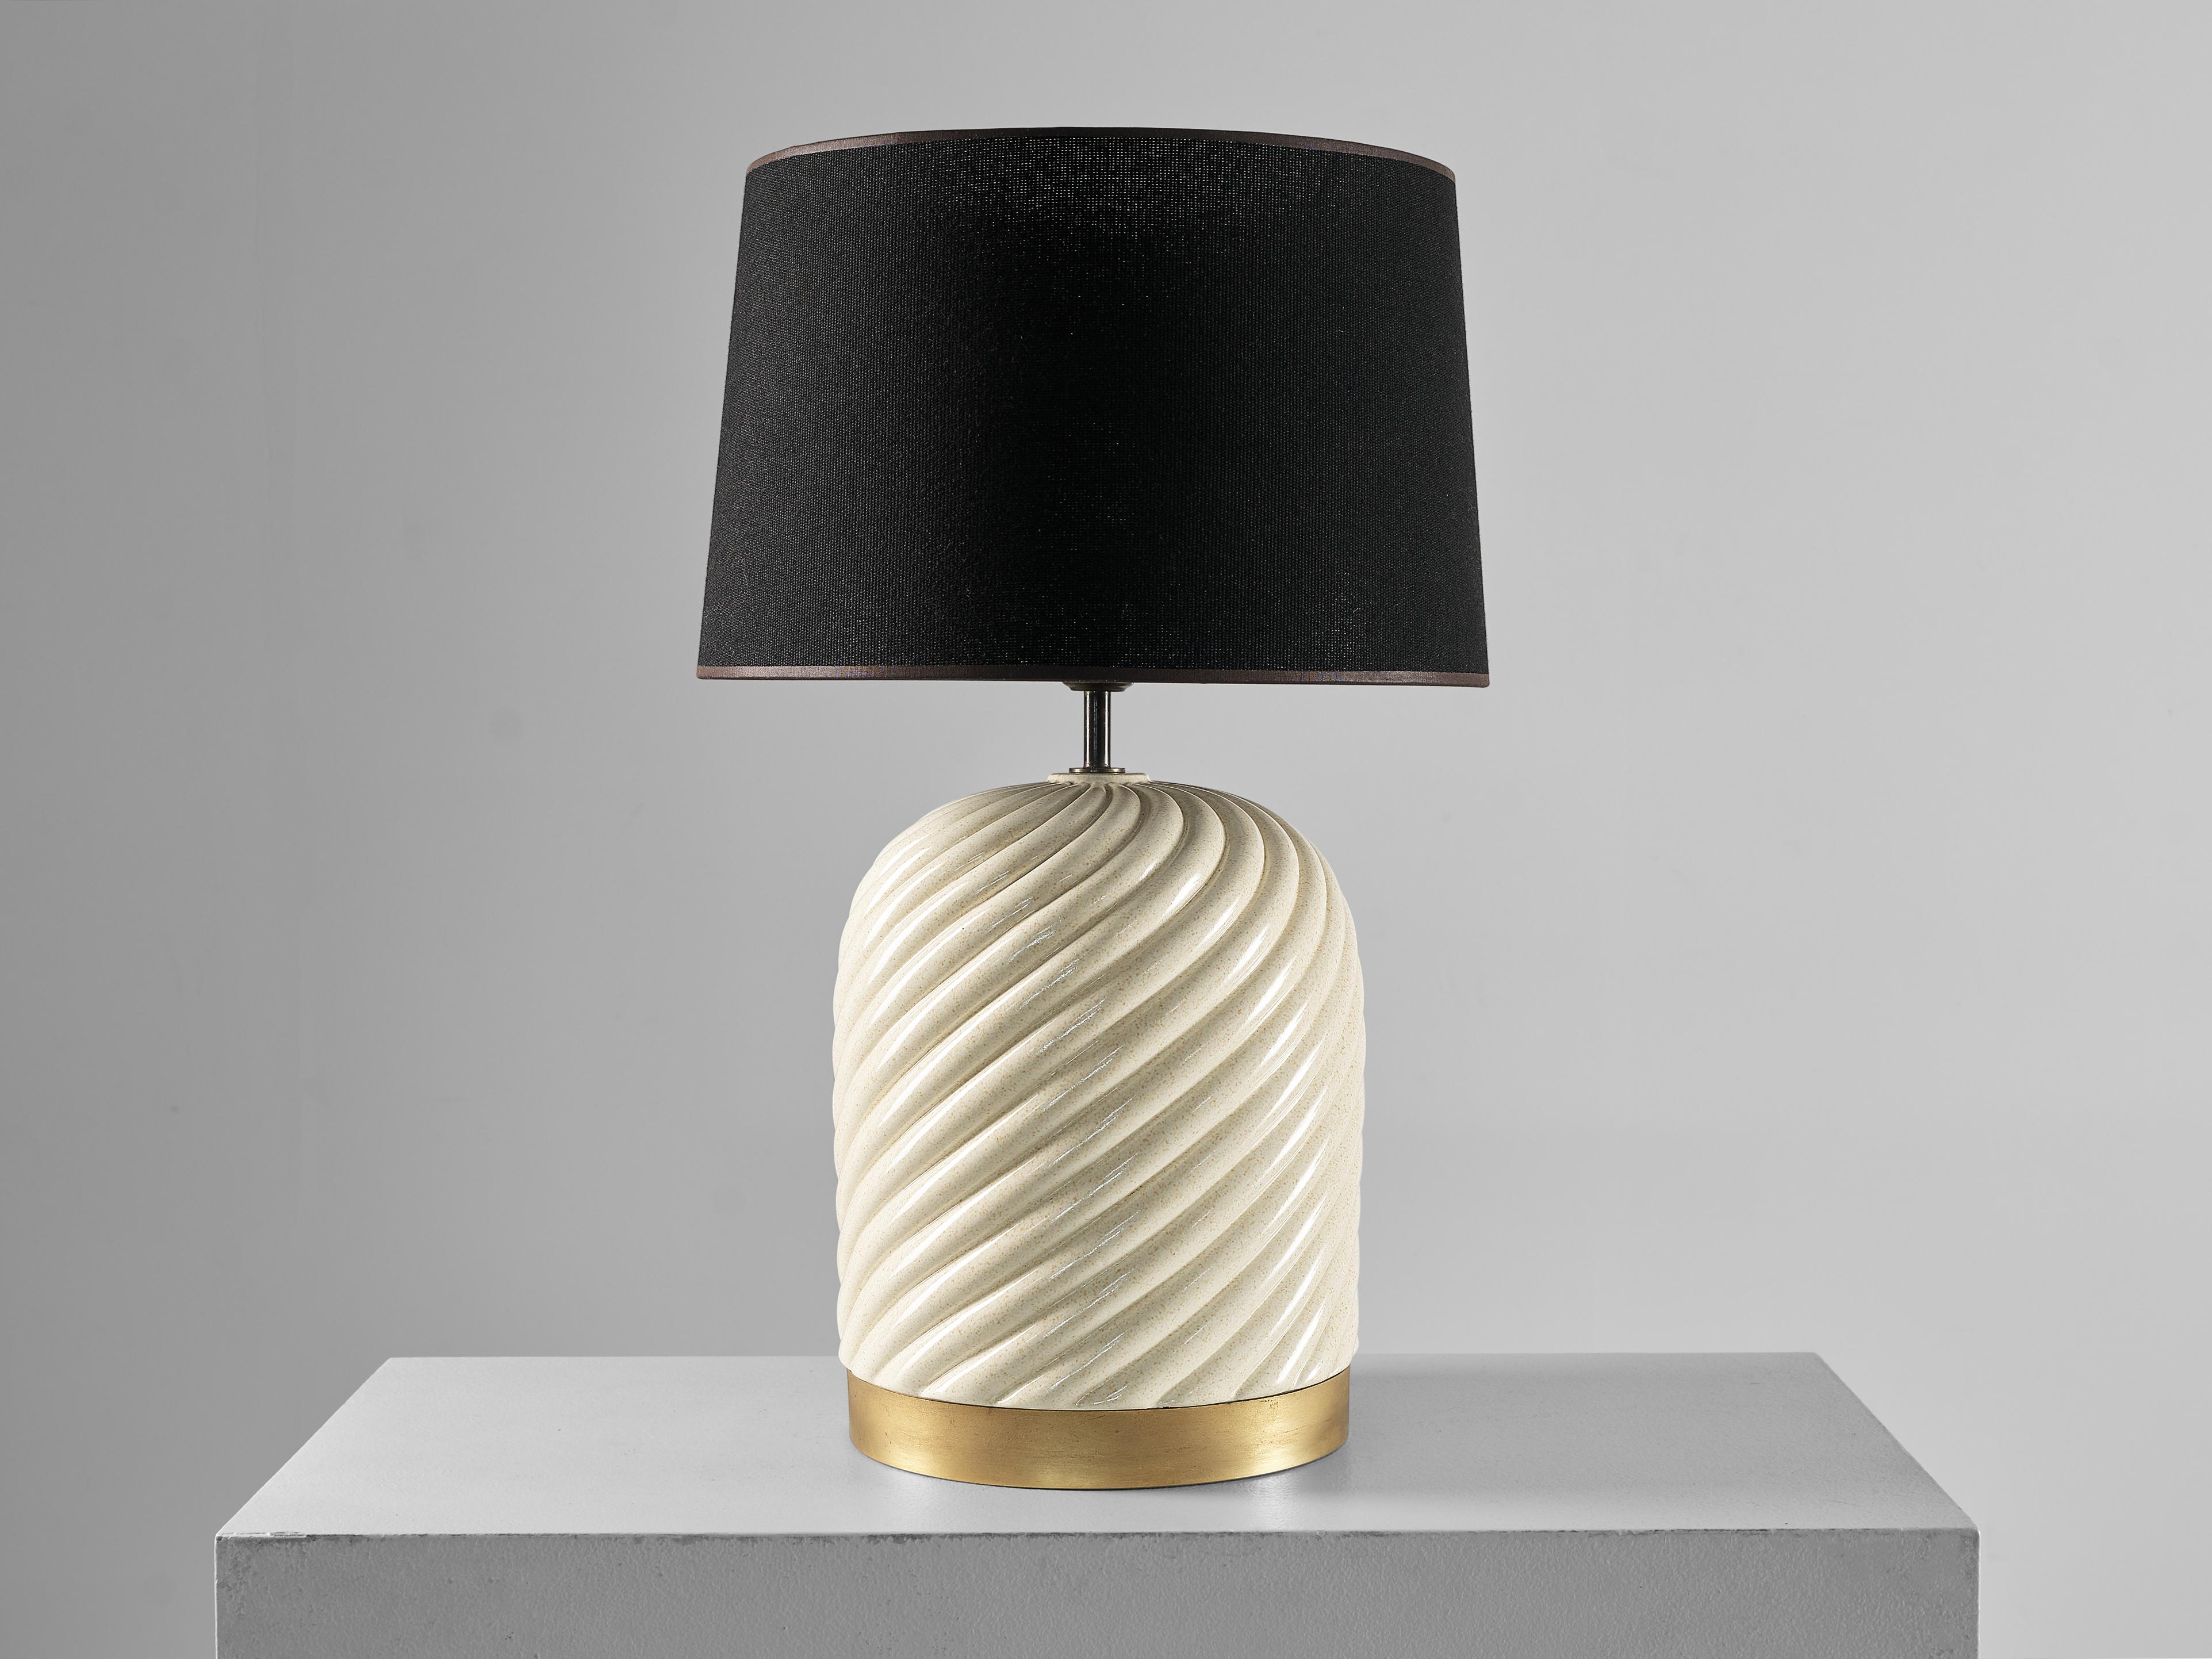 Tommaso Barbi for B Ceramiche, table lamp, brass, ceramic, plastic, Italy, 1970s 

Outstanding table lamp designed by the talented Italian designer Tommaso Barbi. The table lamp has a spiral structure executed in crème ivory colored ceramic with